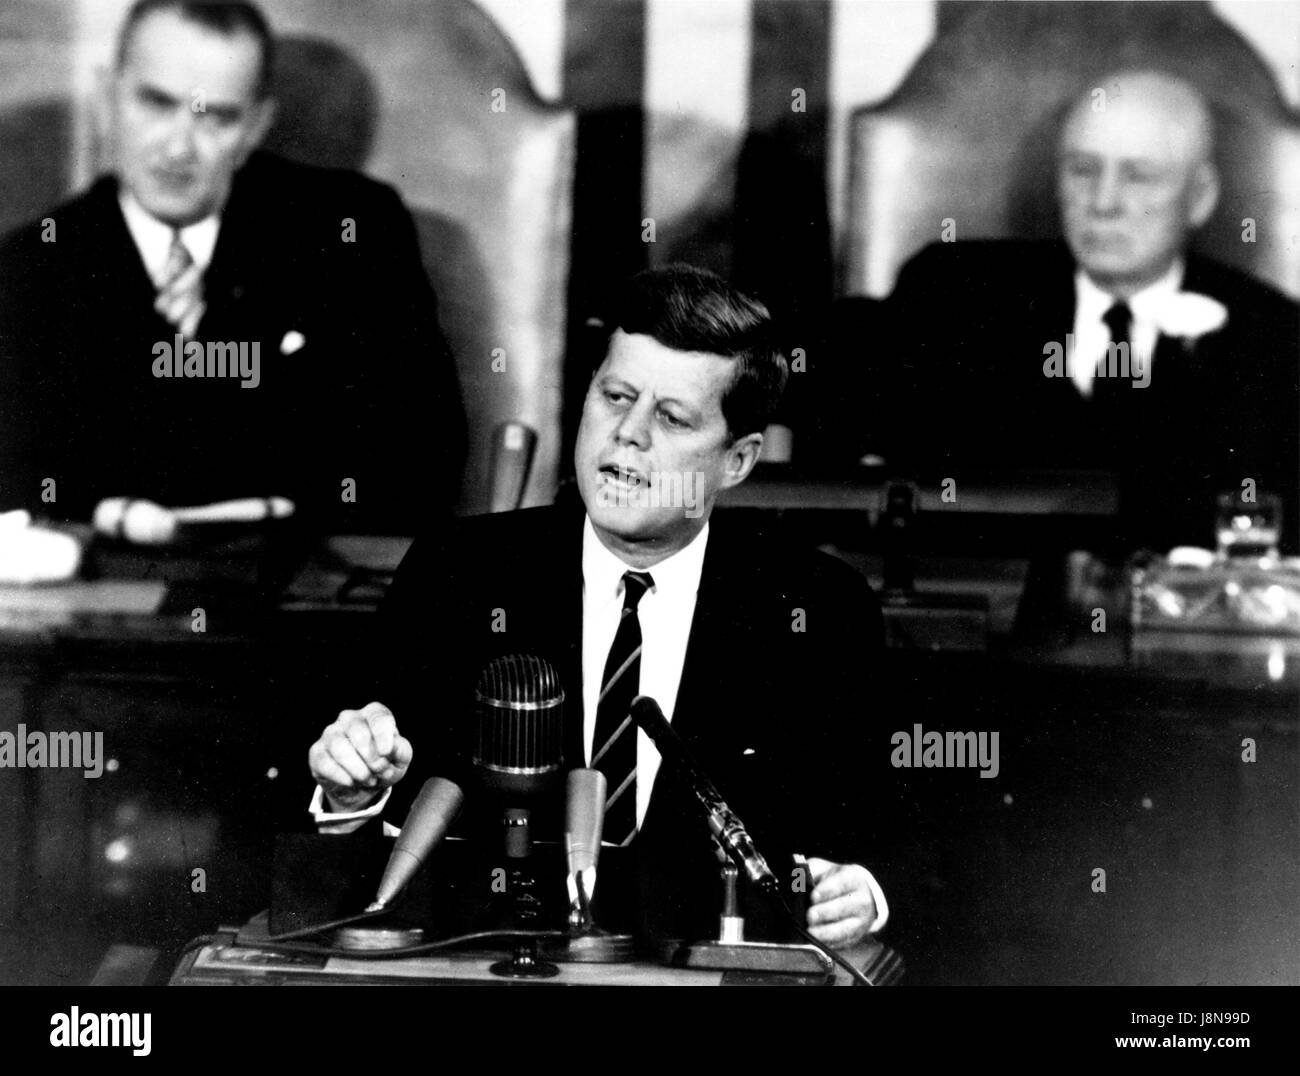 United States President John F. Kennedy outlined his vision for manned exploration of space to a Joint Session of the United States Congress, in Washington, DC on May 25, 1961 when he declared, '.I believe this nation should commit itself to achieving the goal, before this decade is out, of landing a man on the Moon and returning him safely to the Earth.' This goal was achieved when astronaut Neil A. Armstrong became the first human to set foot upon the Moon at 10:56 p.m. EDT, July 20, 1969. Shown in the background are, (left) Vice President Lyndon Johnson, and (right) Speaker of the House Stock Photo